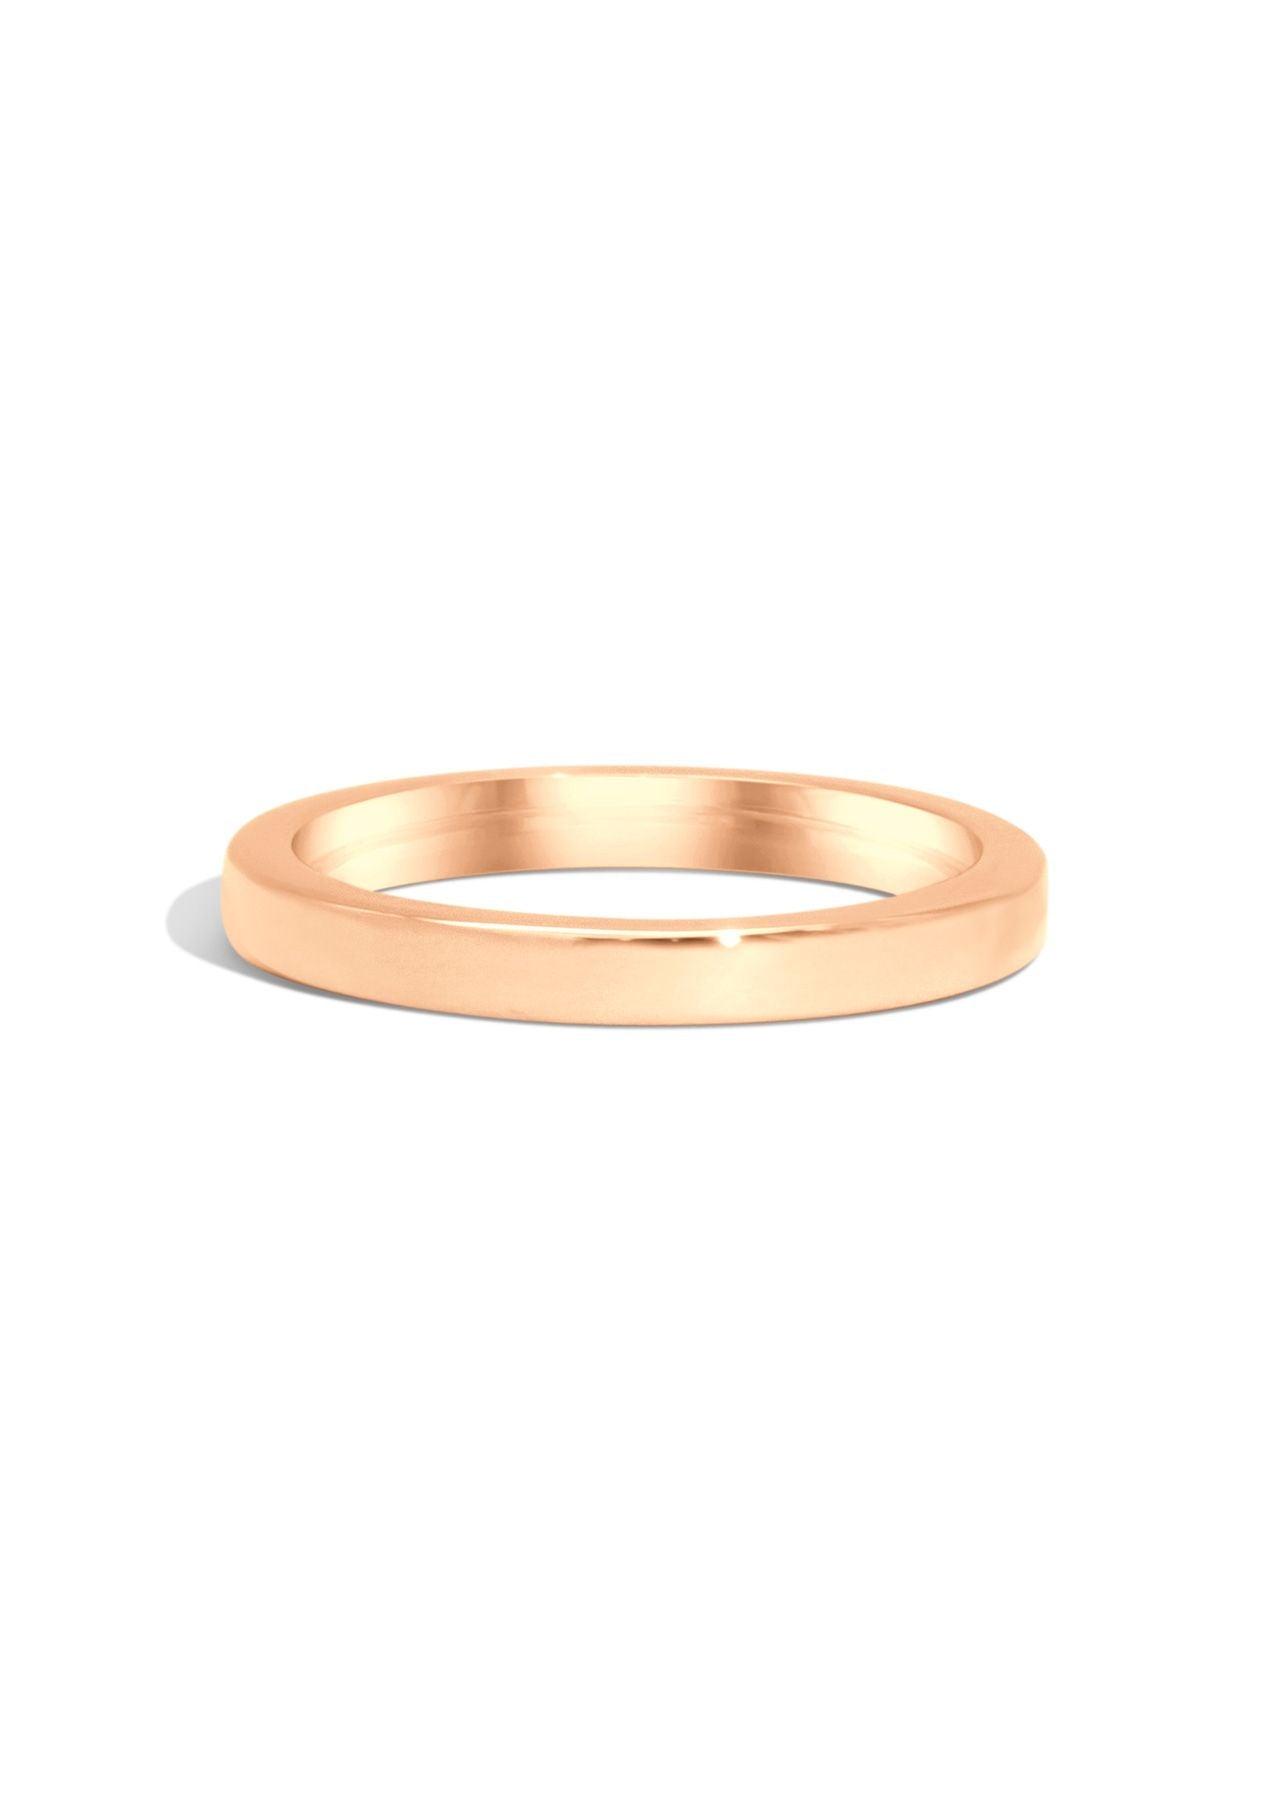 The Arc Rose Gold Band